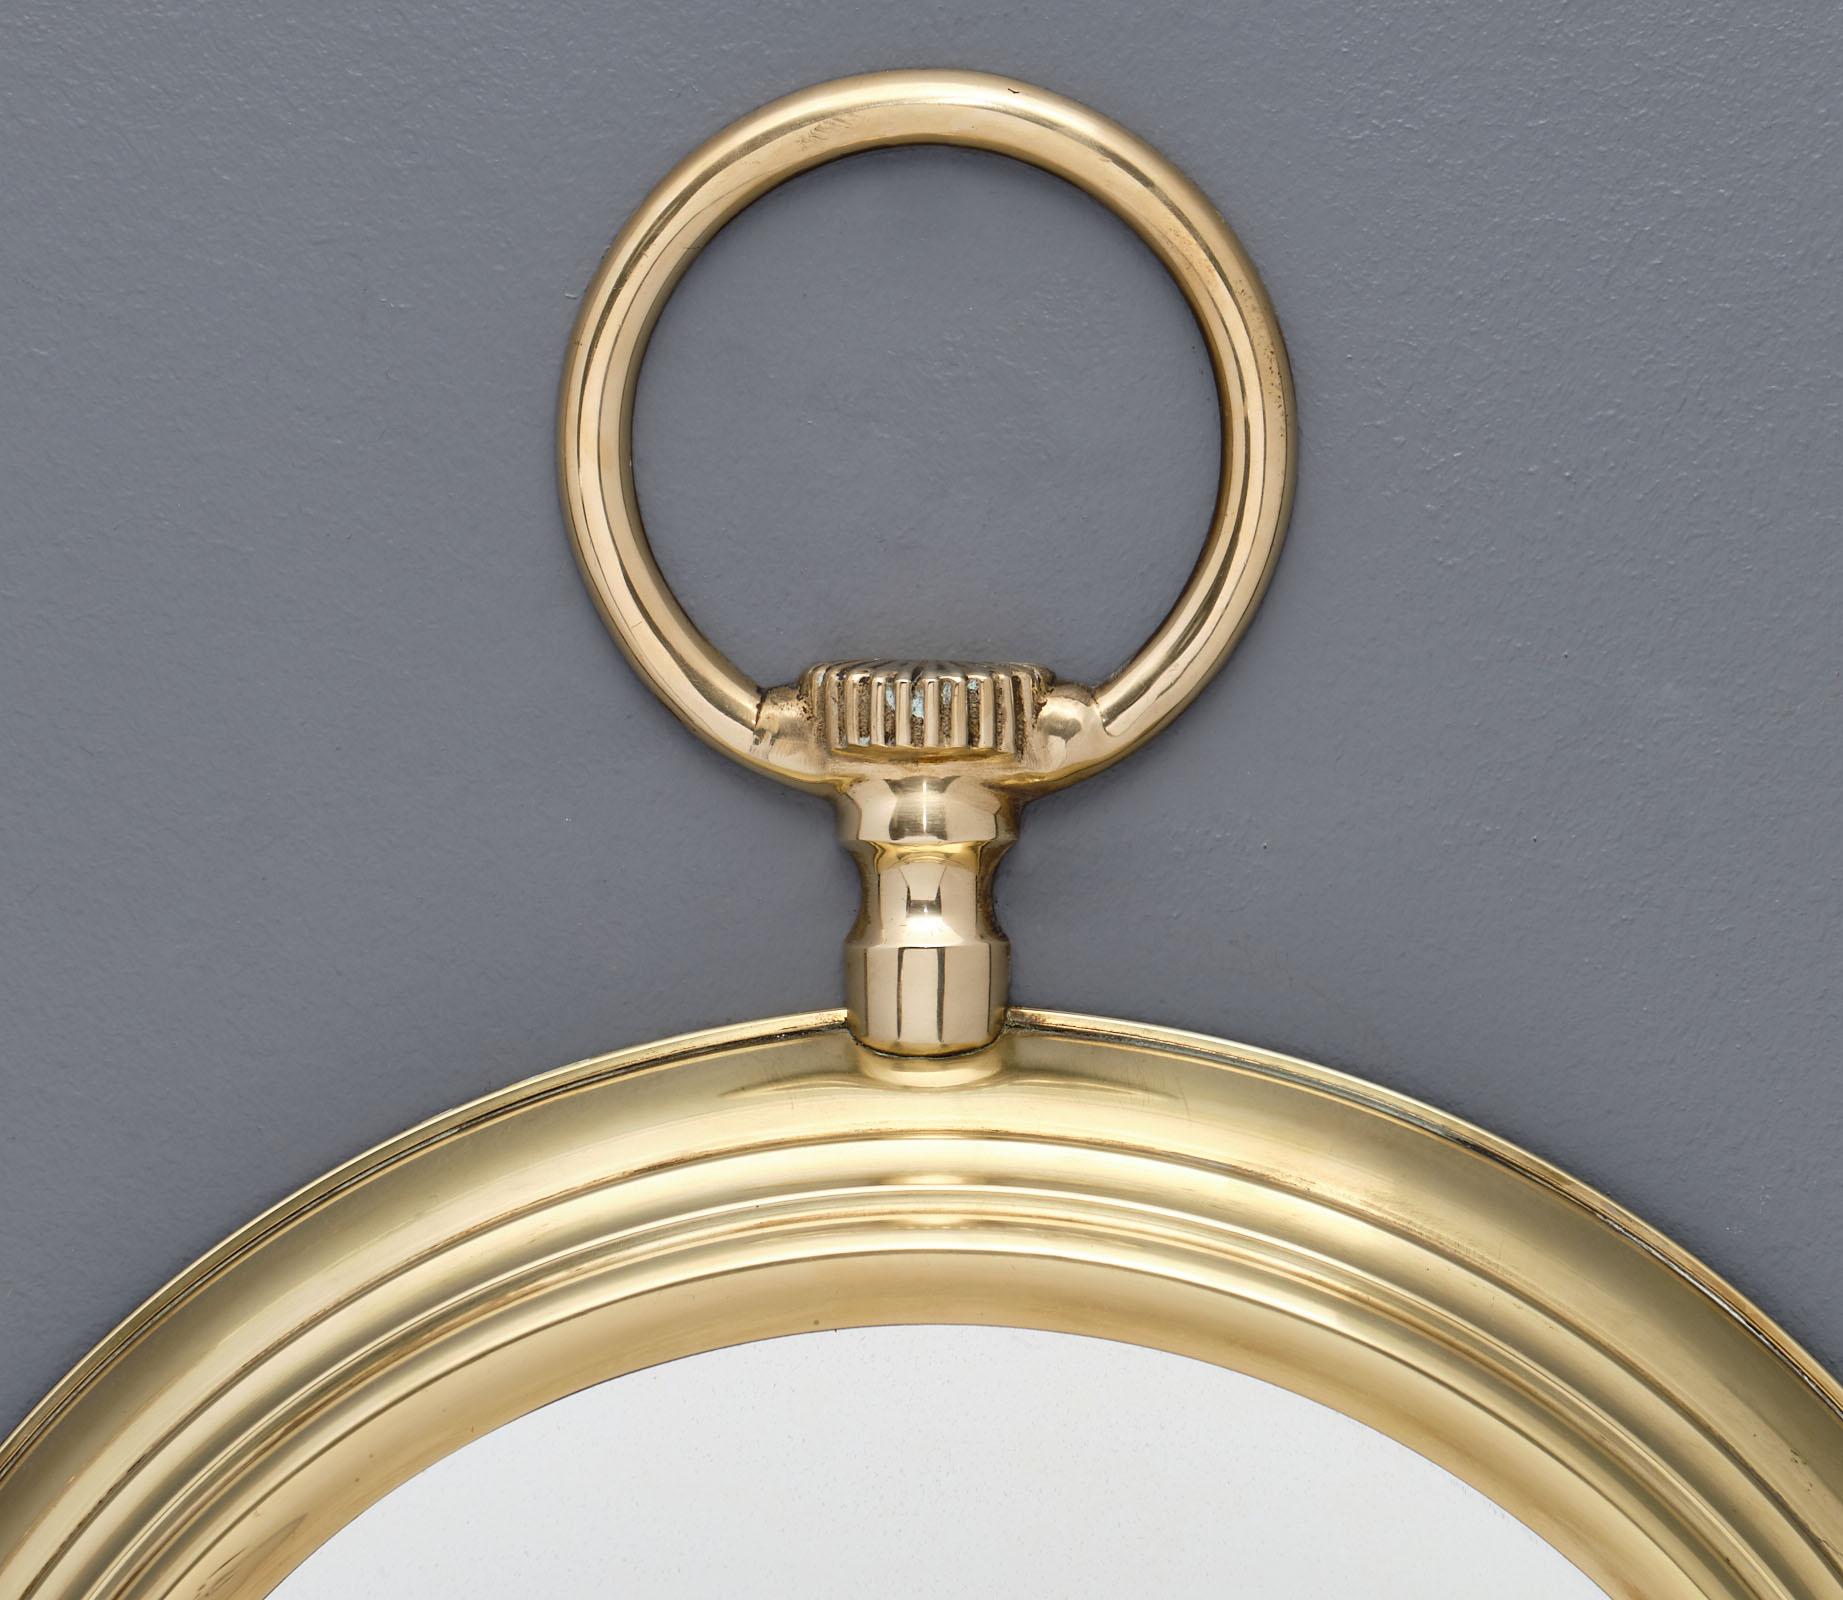 A French brass vintage pocket watch mirror from the Art Deco period with a circular central mirror.